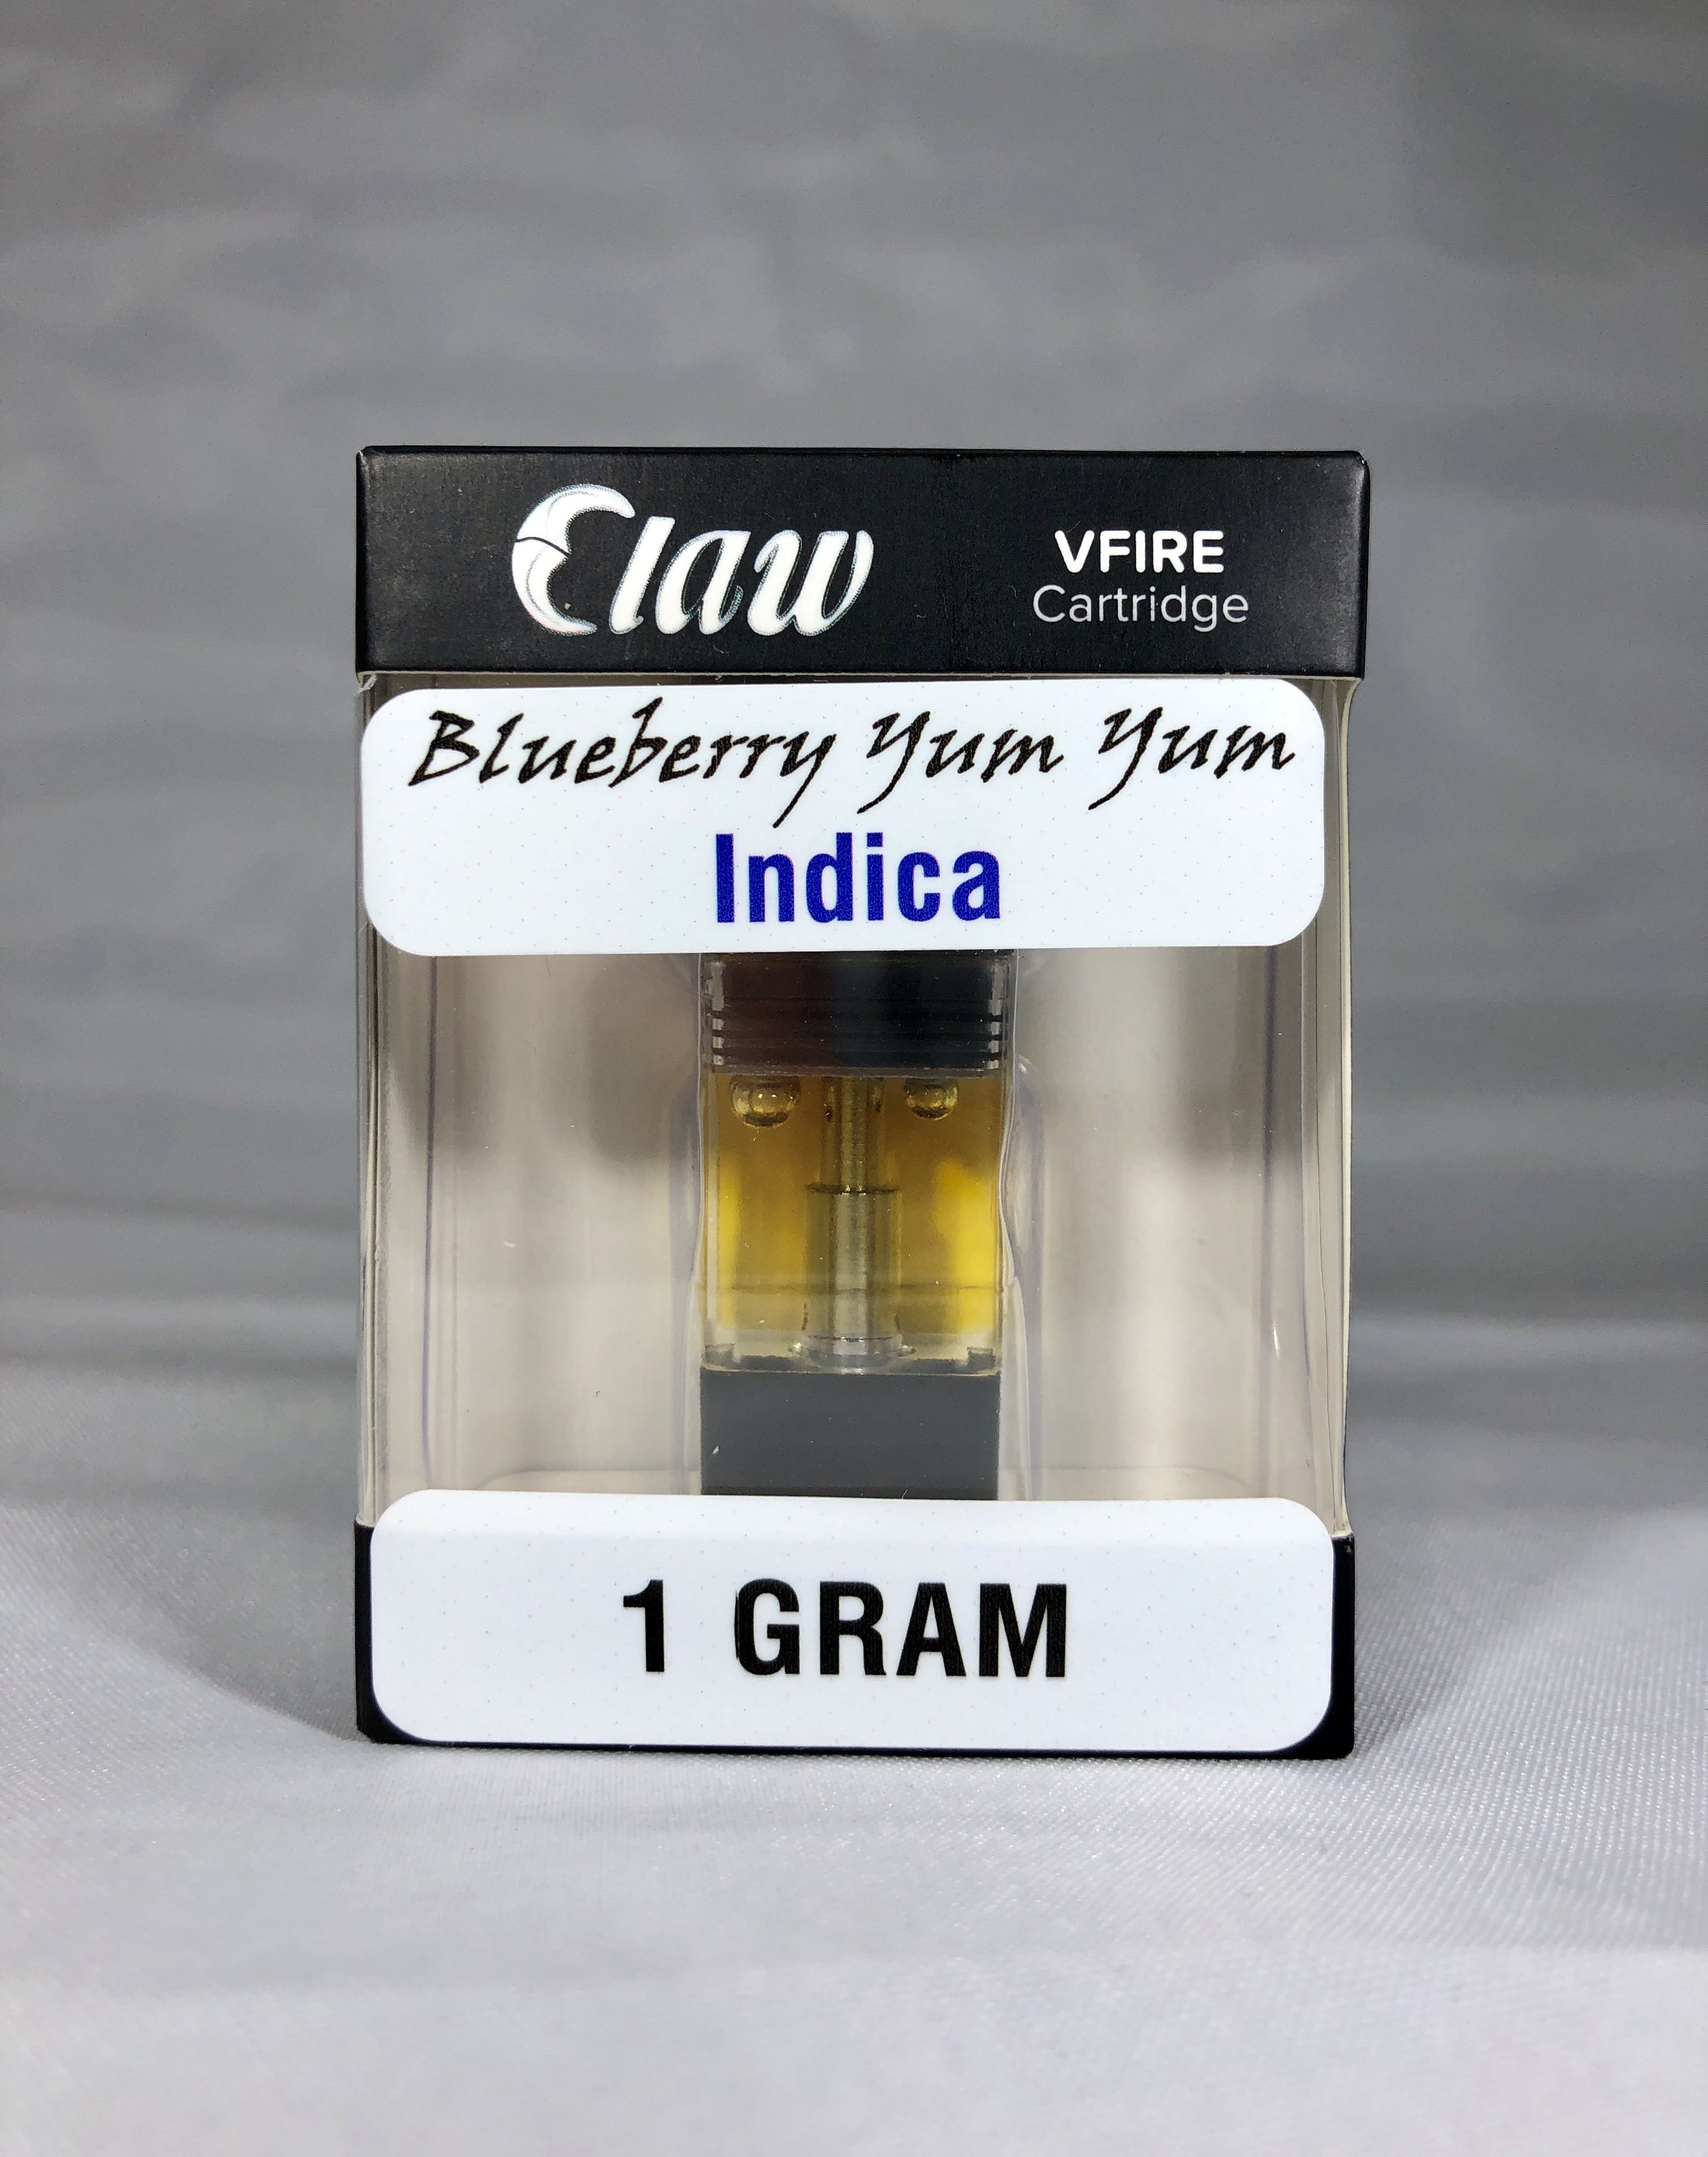 concentrate-claw-vfire-cartridge